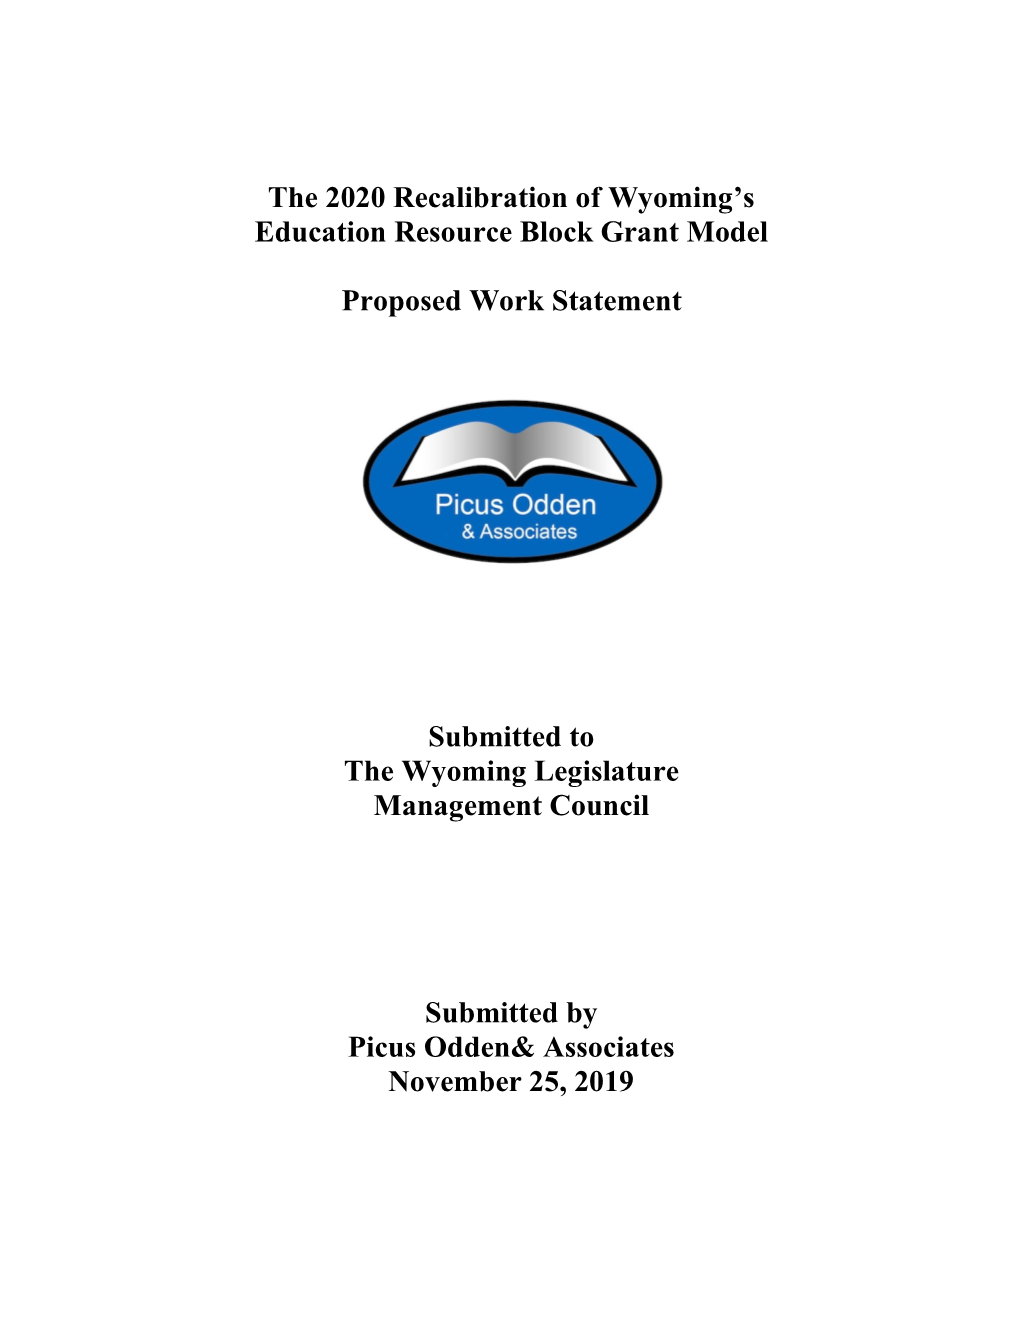 The 2020 Recalibration of Wyoming's Education Resource Block Grant